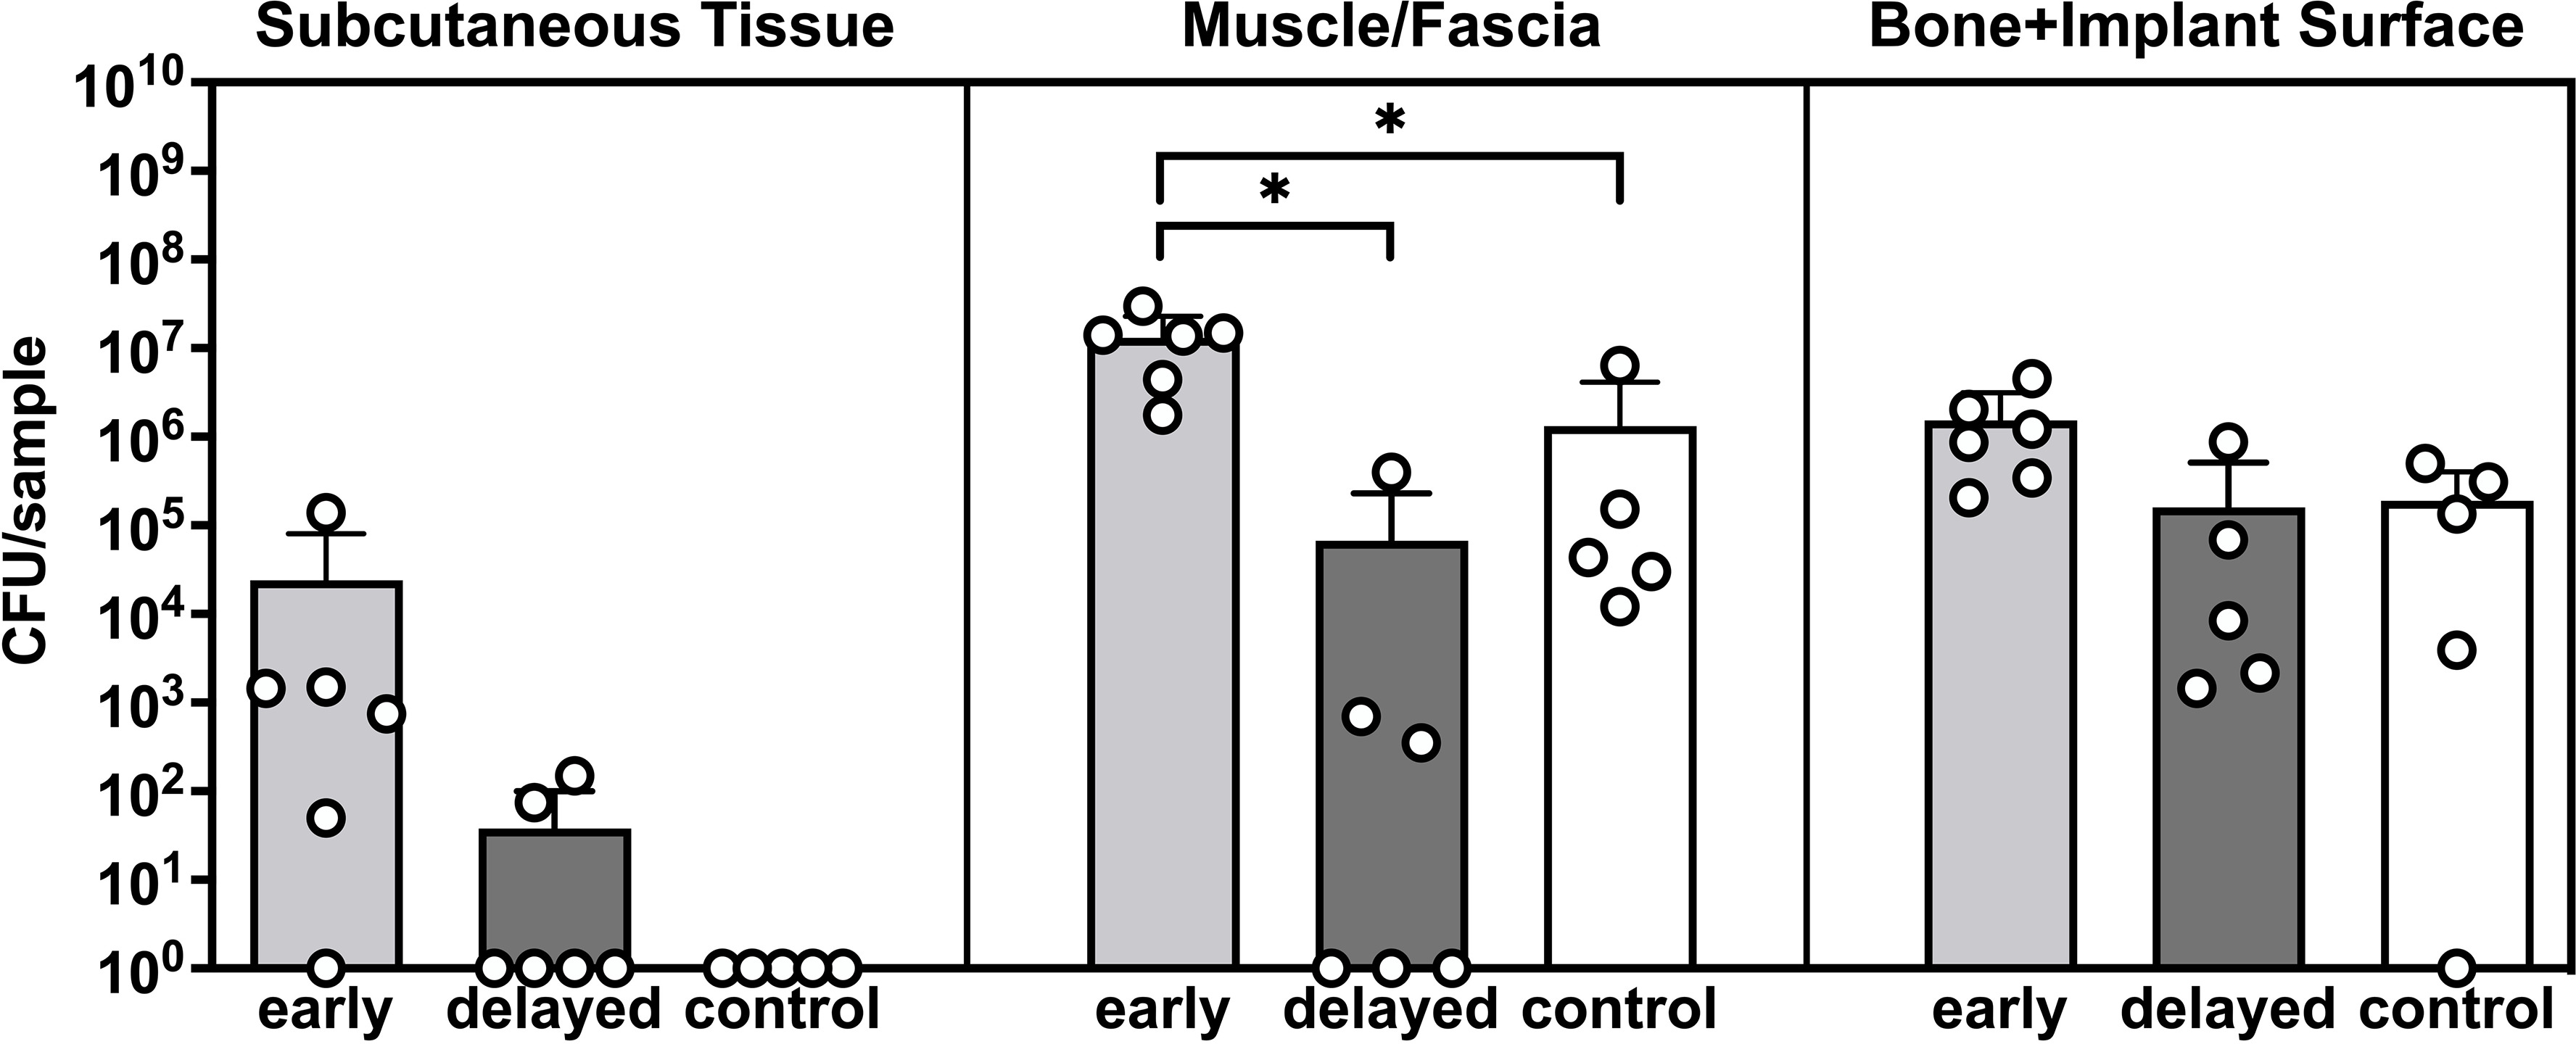 Fig. 3 
            Quantitative microbiology of the different samples collected during revision surgery. Staphylococcus aureus colony-forming unit (CFU) counts in subcutaneous tissue, muscle/fascia, and bone and implant surface in the early, delayed, and control groups. Bars indicate the mean, and error bars indicate the standard deviation. *p < 0.05, independent-samples t-test.
          